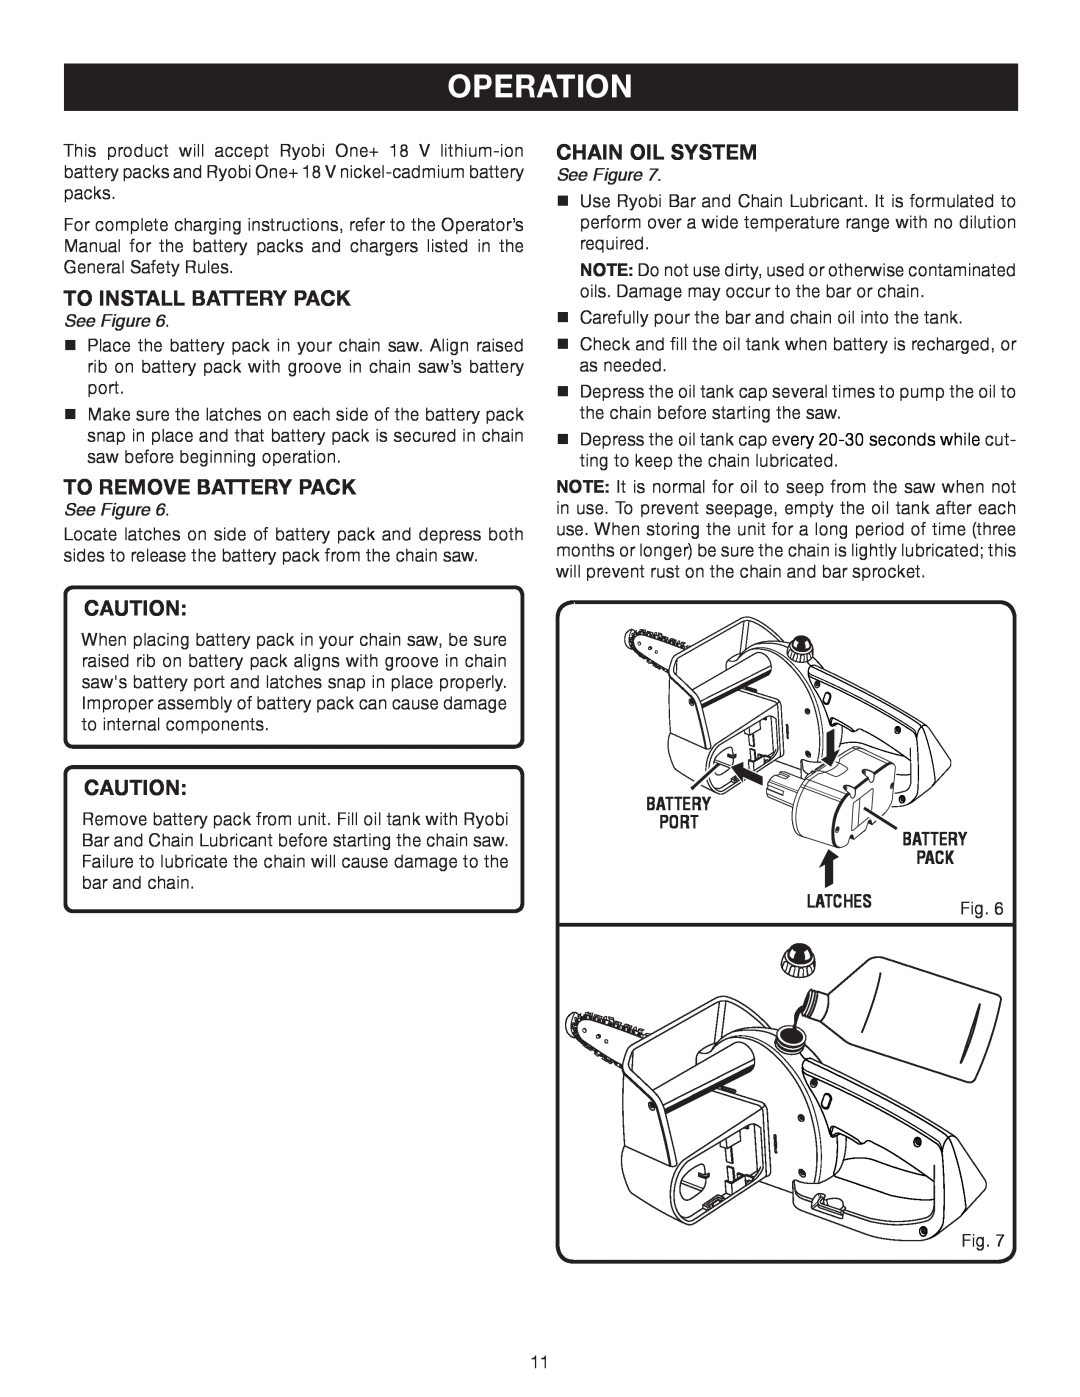 Ryobi P540B manual To Install Battery Pack, To Remove Battery Pack, Chain Oil System, Operation, See Figure 